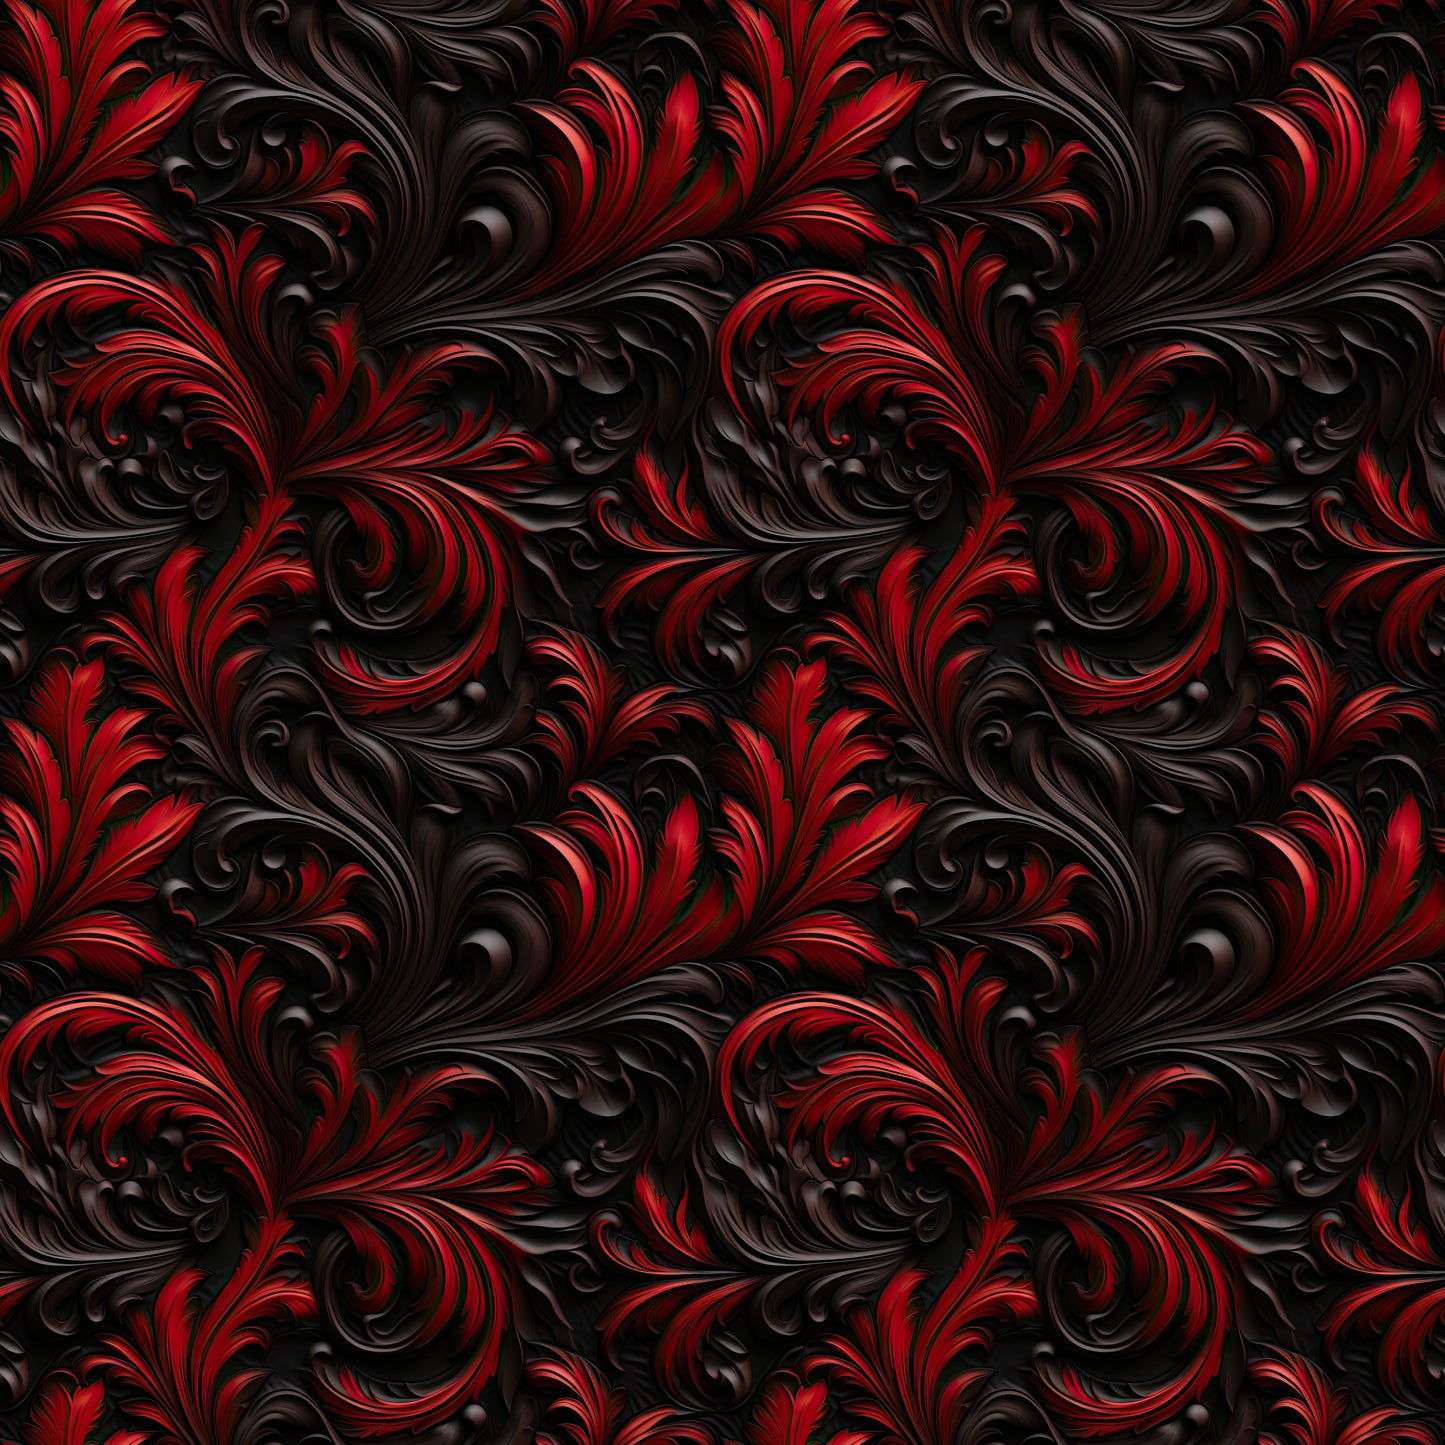 RED AND BLACK LEATHER VINYL - MULTIPLE VARIATIONS